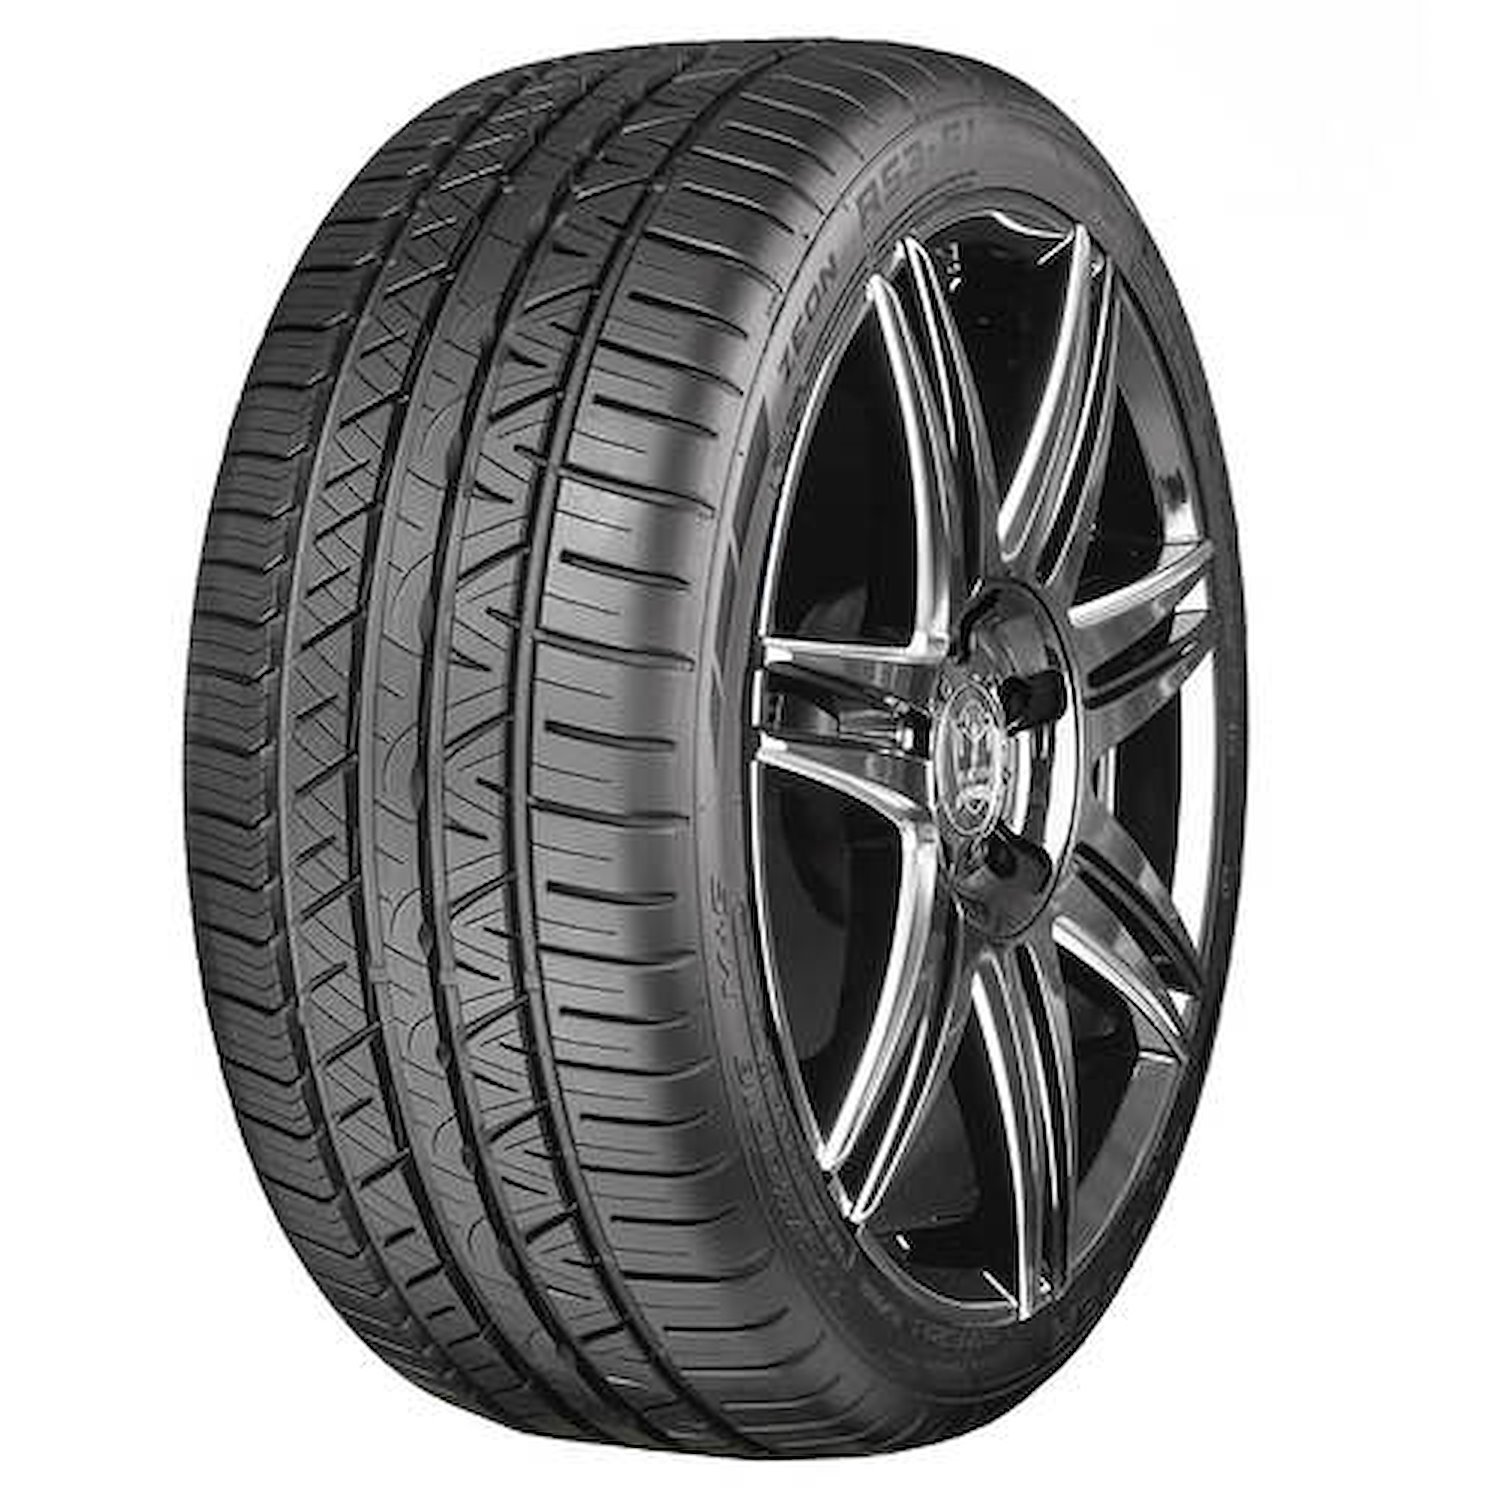 Zeon RS3-G1 High-Performance Tire, 275/40R19